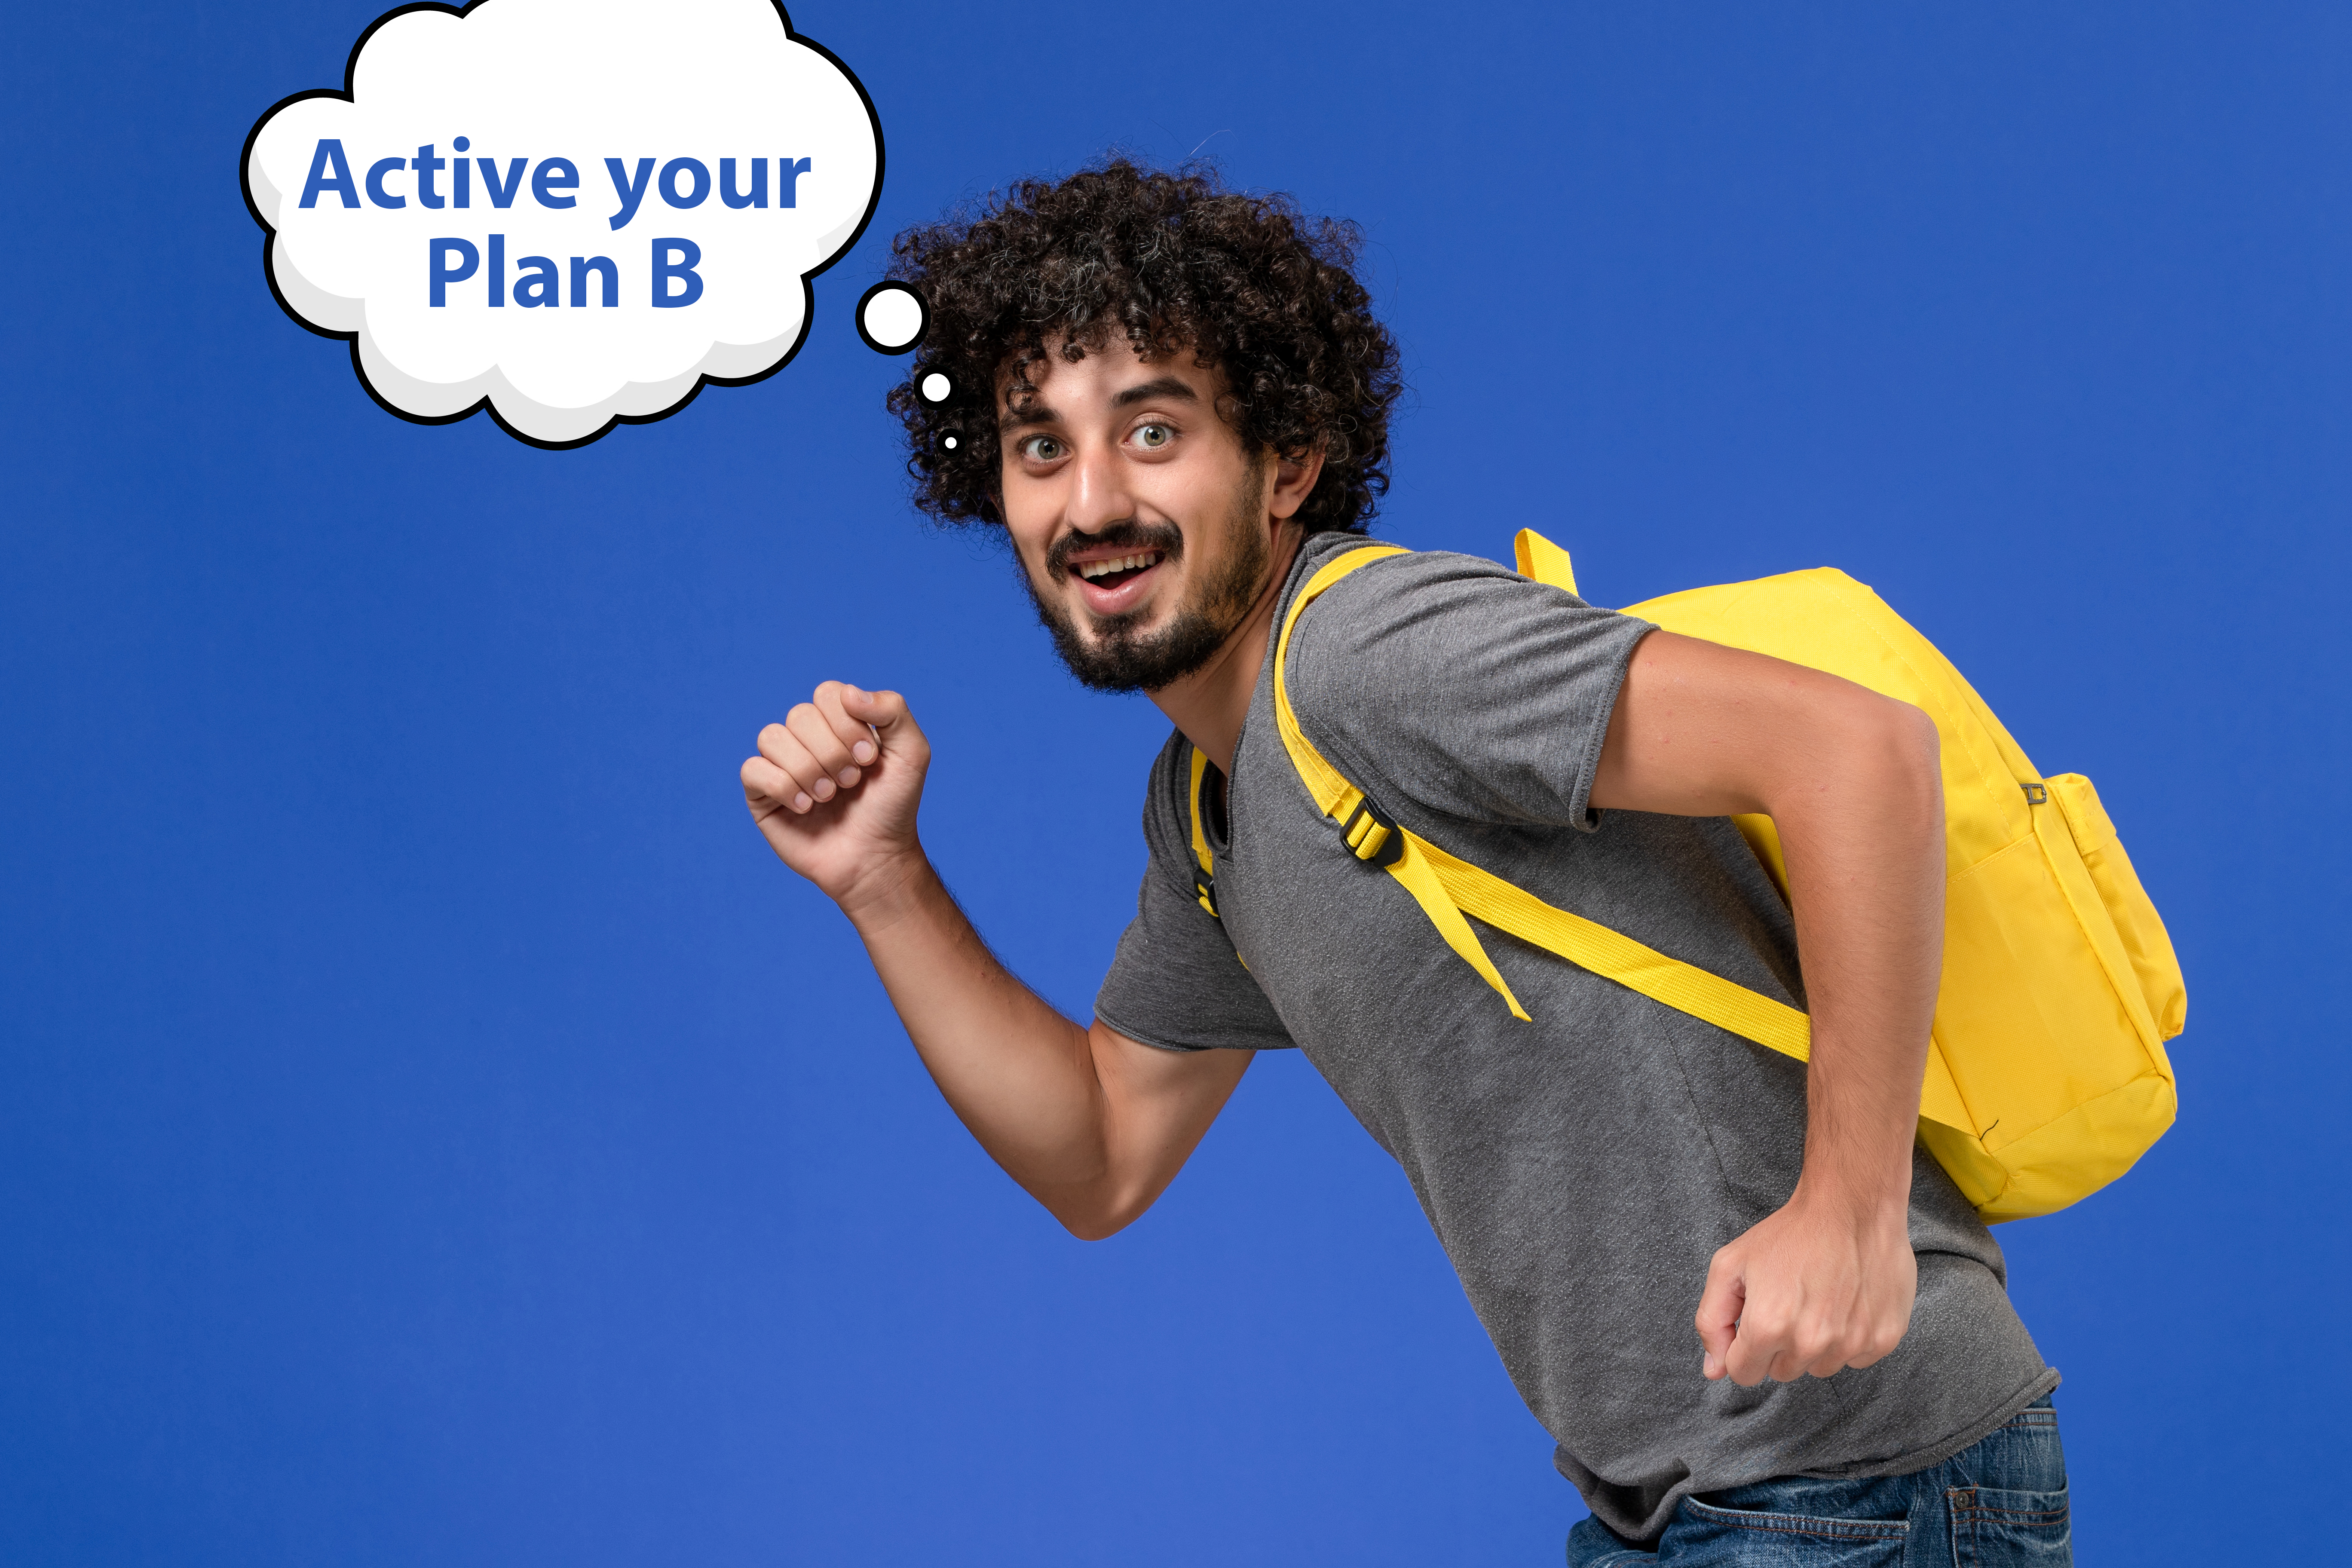 Have you not got a government job as yet? Activate your Plan B and choose a career in online MBA right now!!